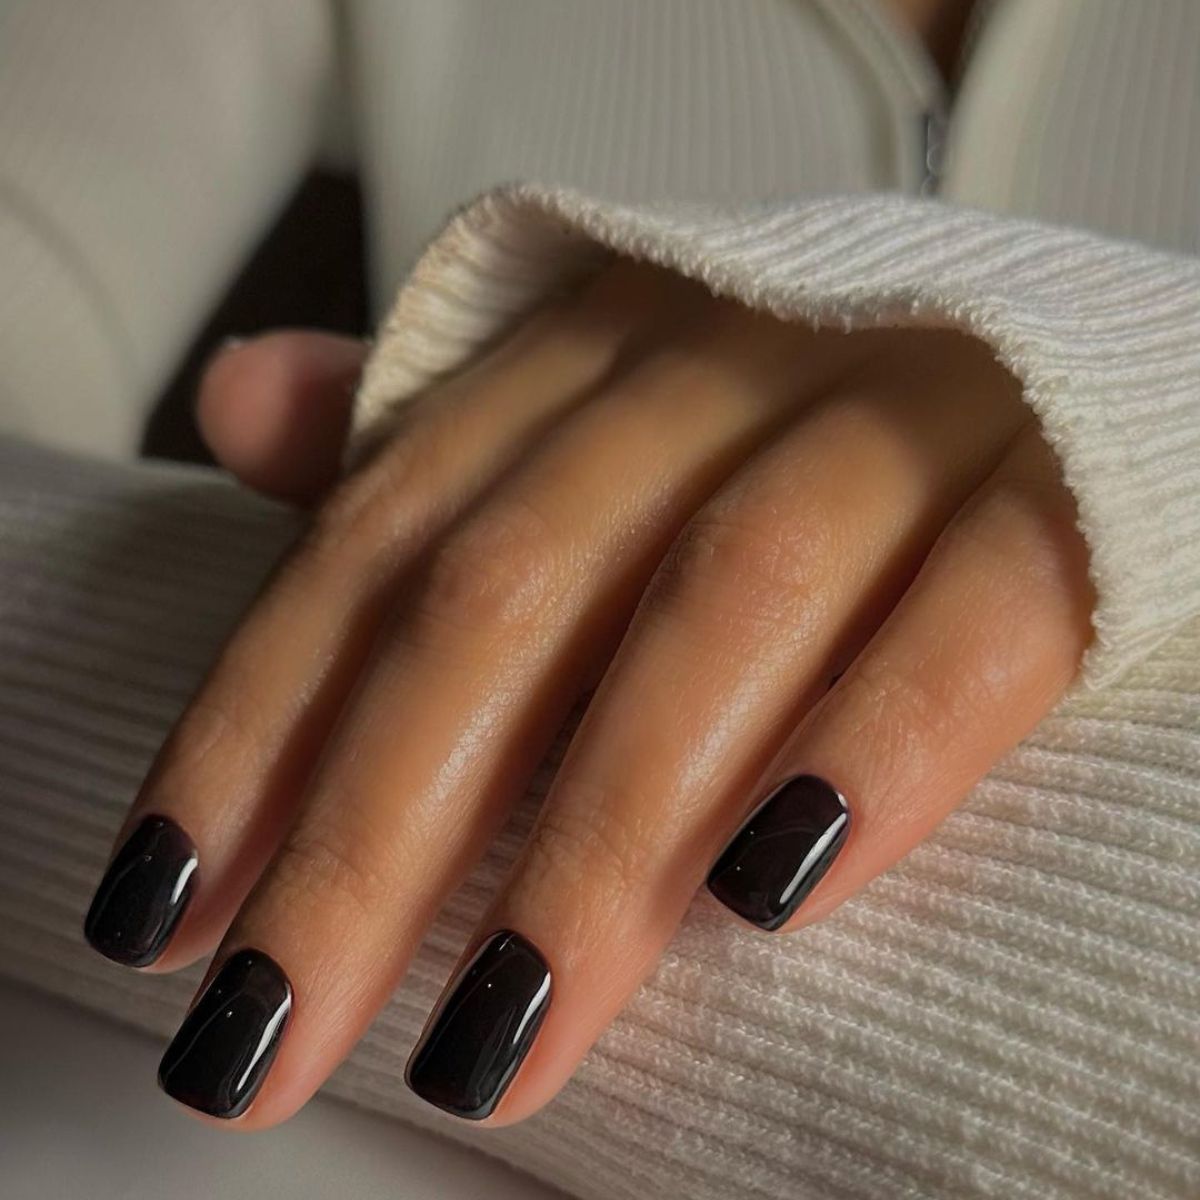 The 5 Biggest Nail Trends of the Summer | Elle Canada